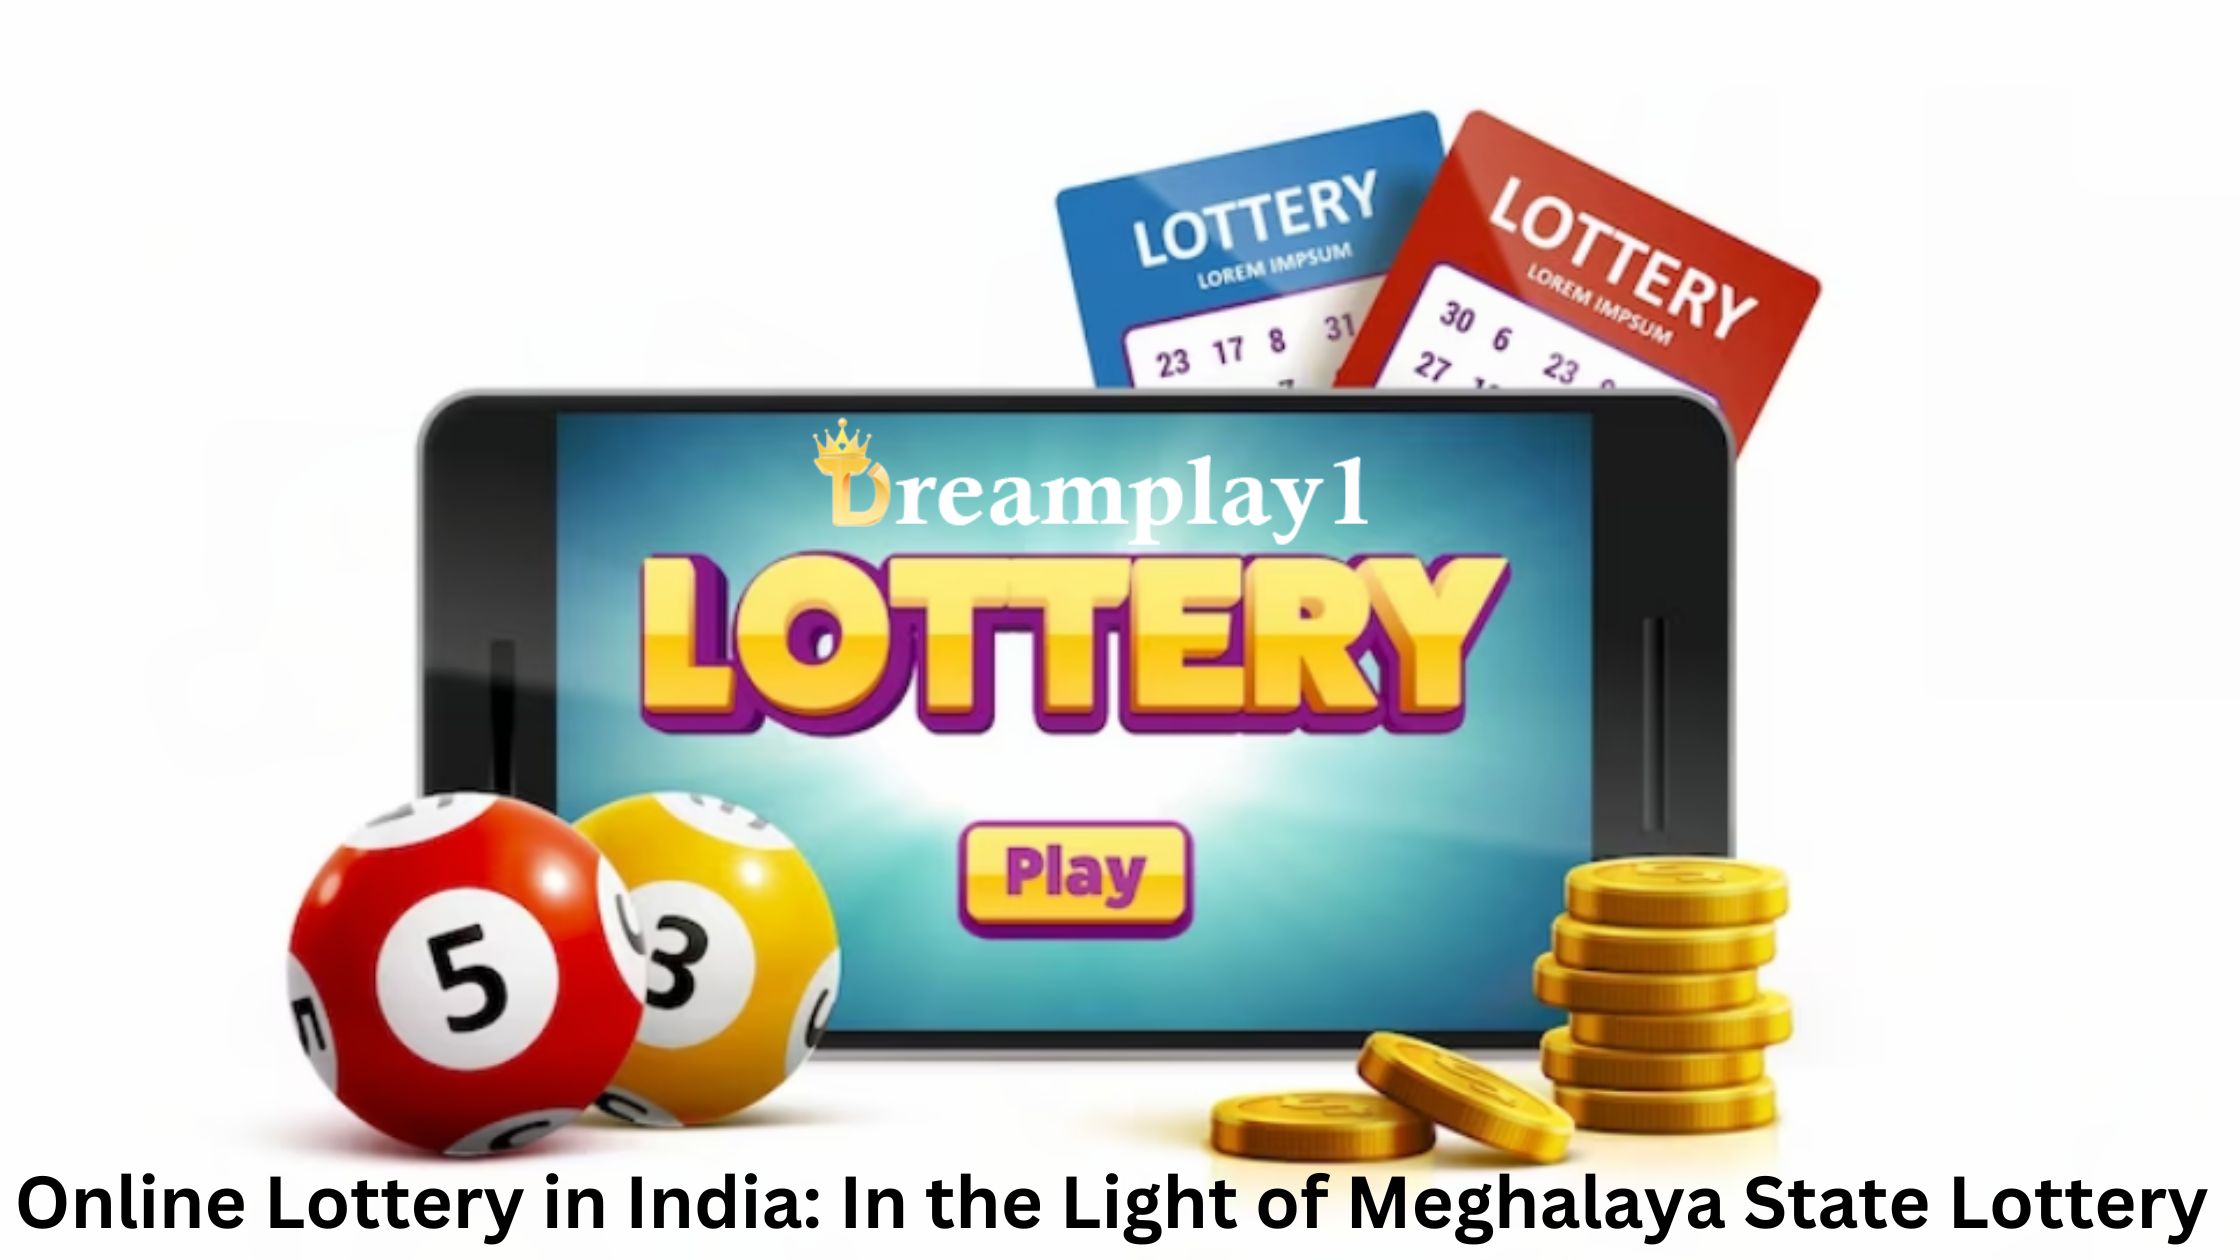 Online Lottery in India: In the Light of Meghalaya State Lottery